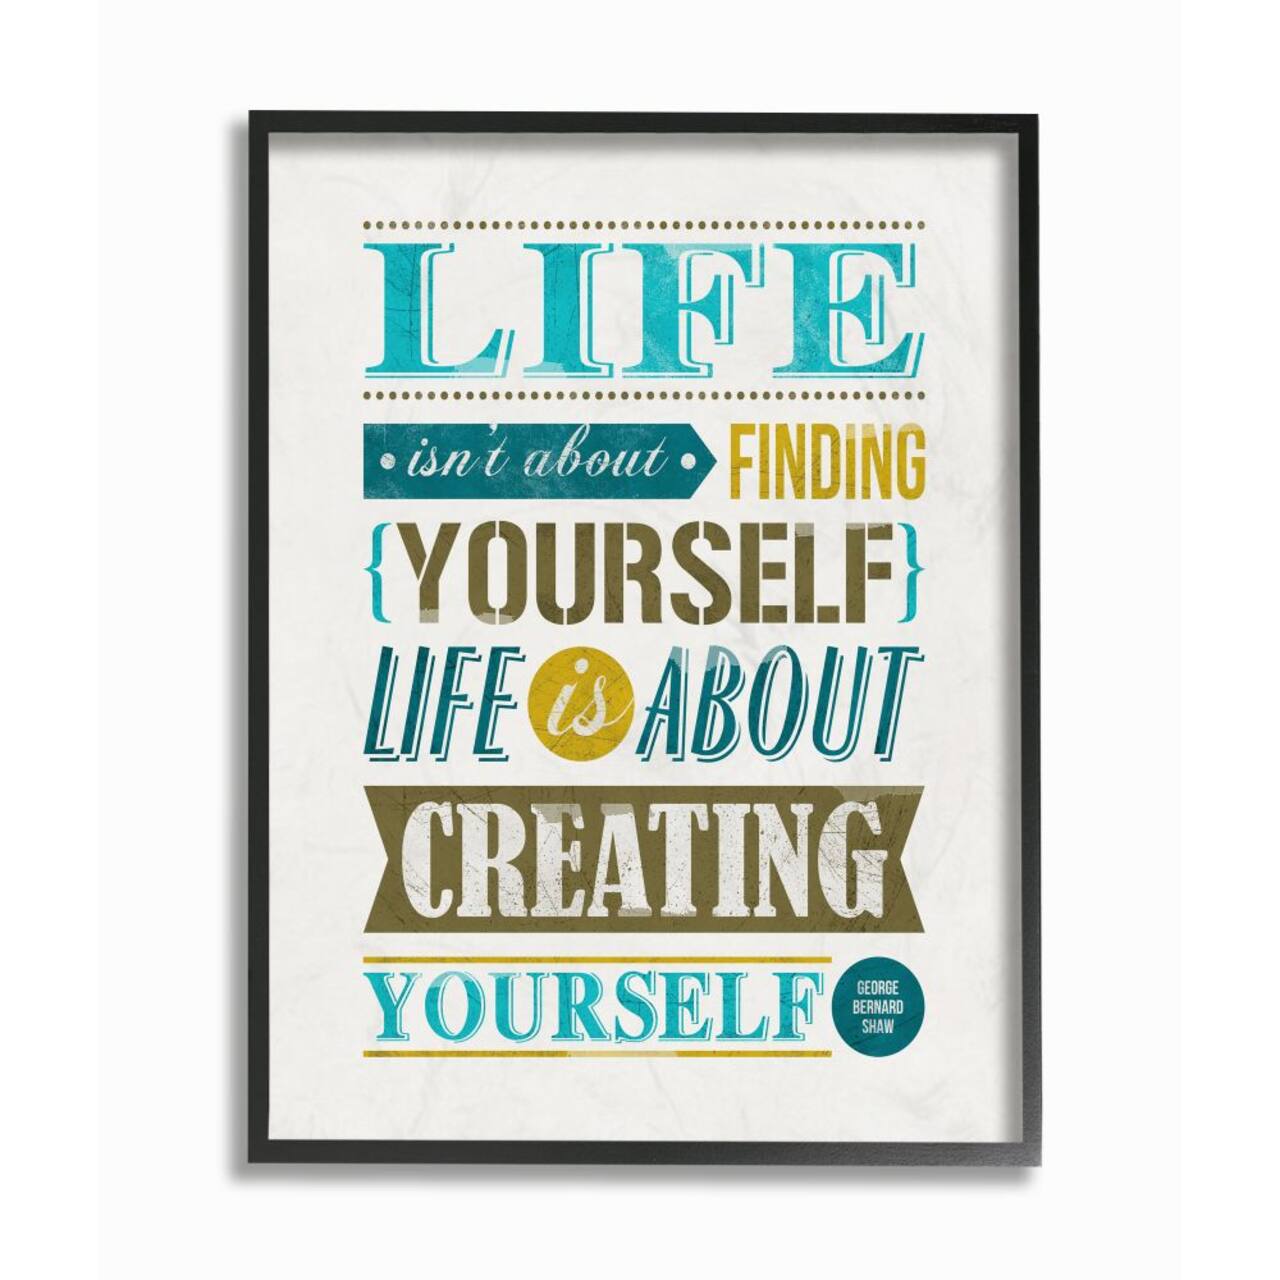 Stupell Industries Creating Yourself Inspirational Wall Art in Black Frame